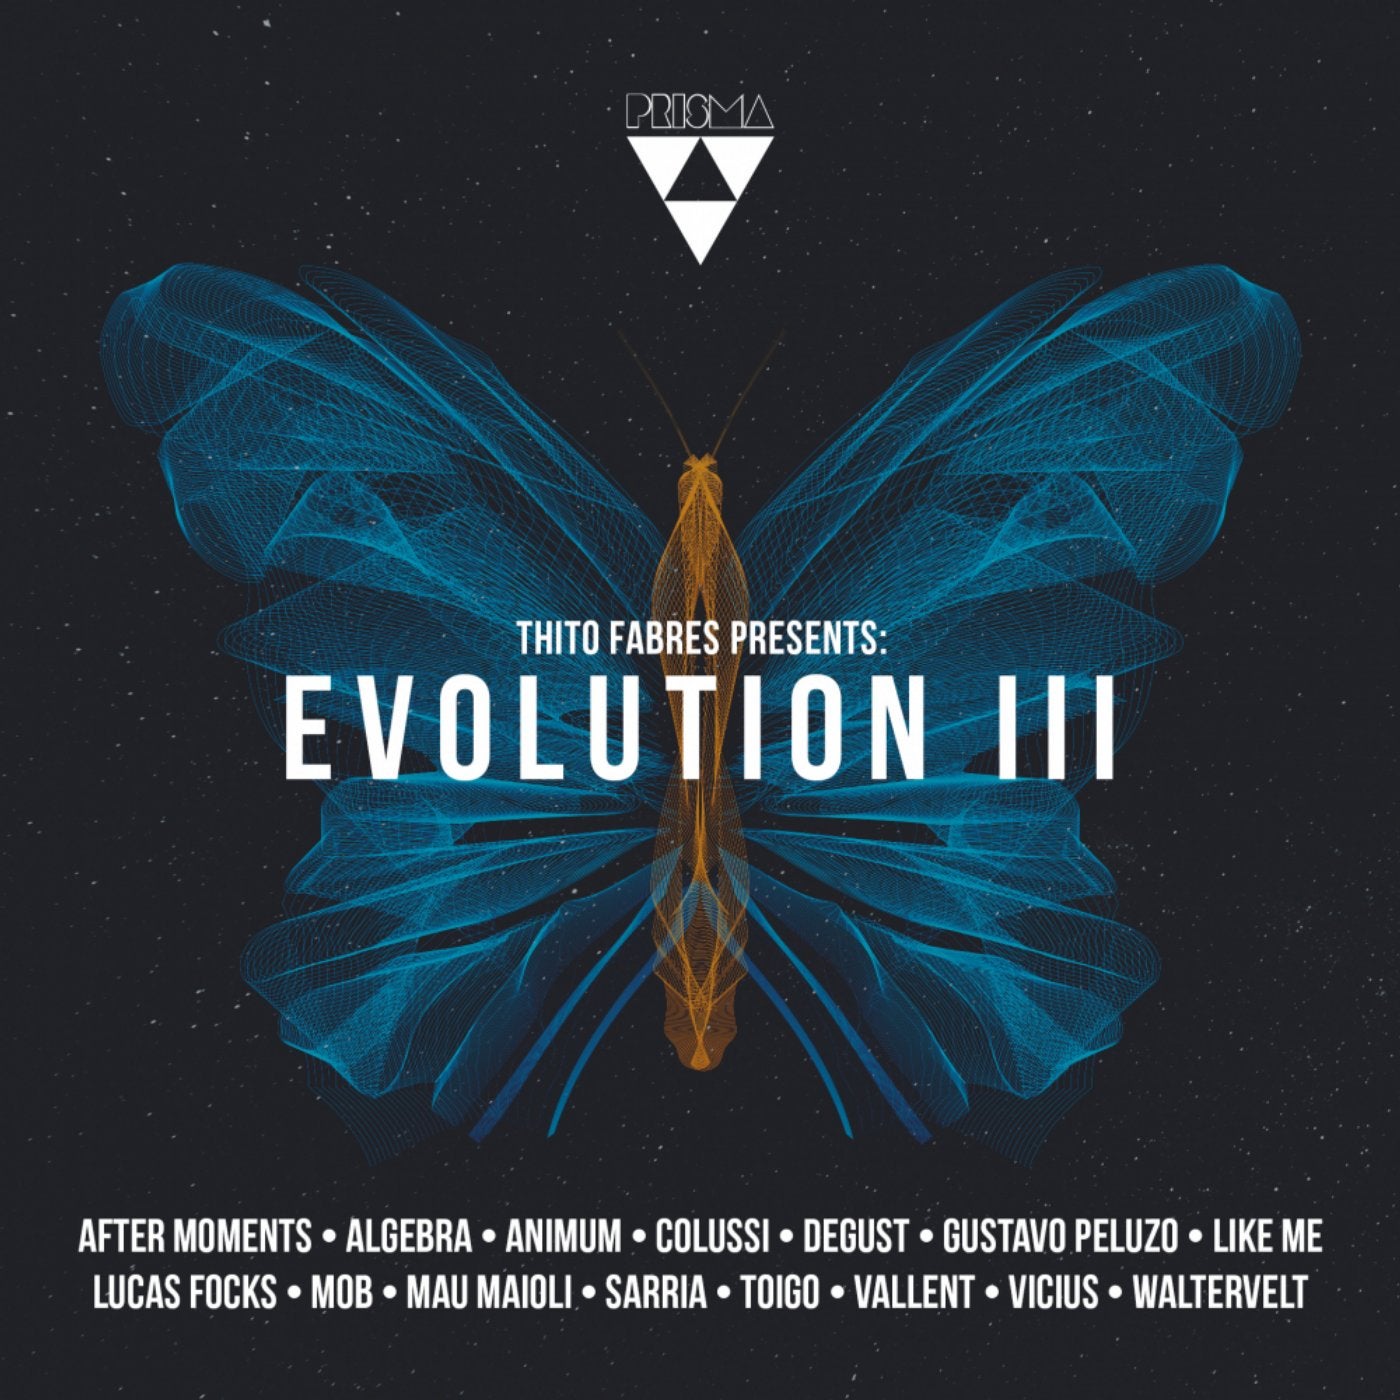 Thito Fabres Presents: Evolution III